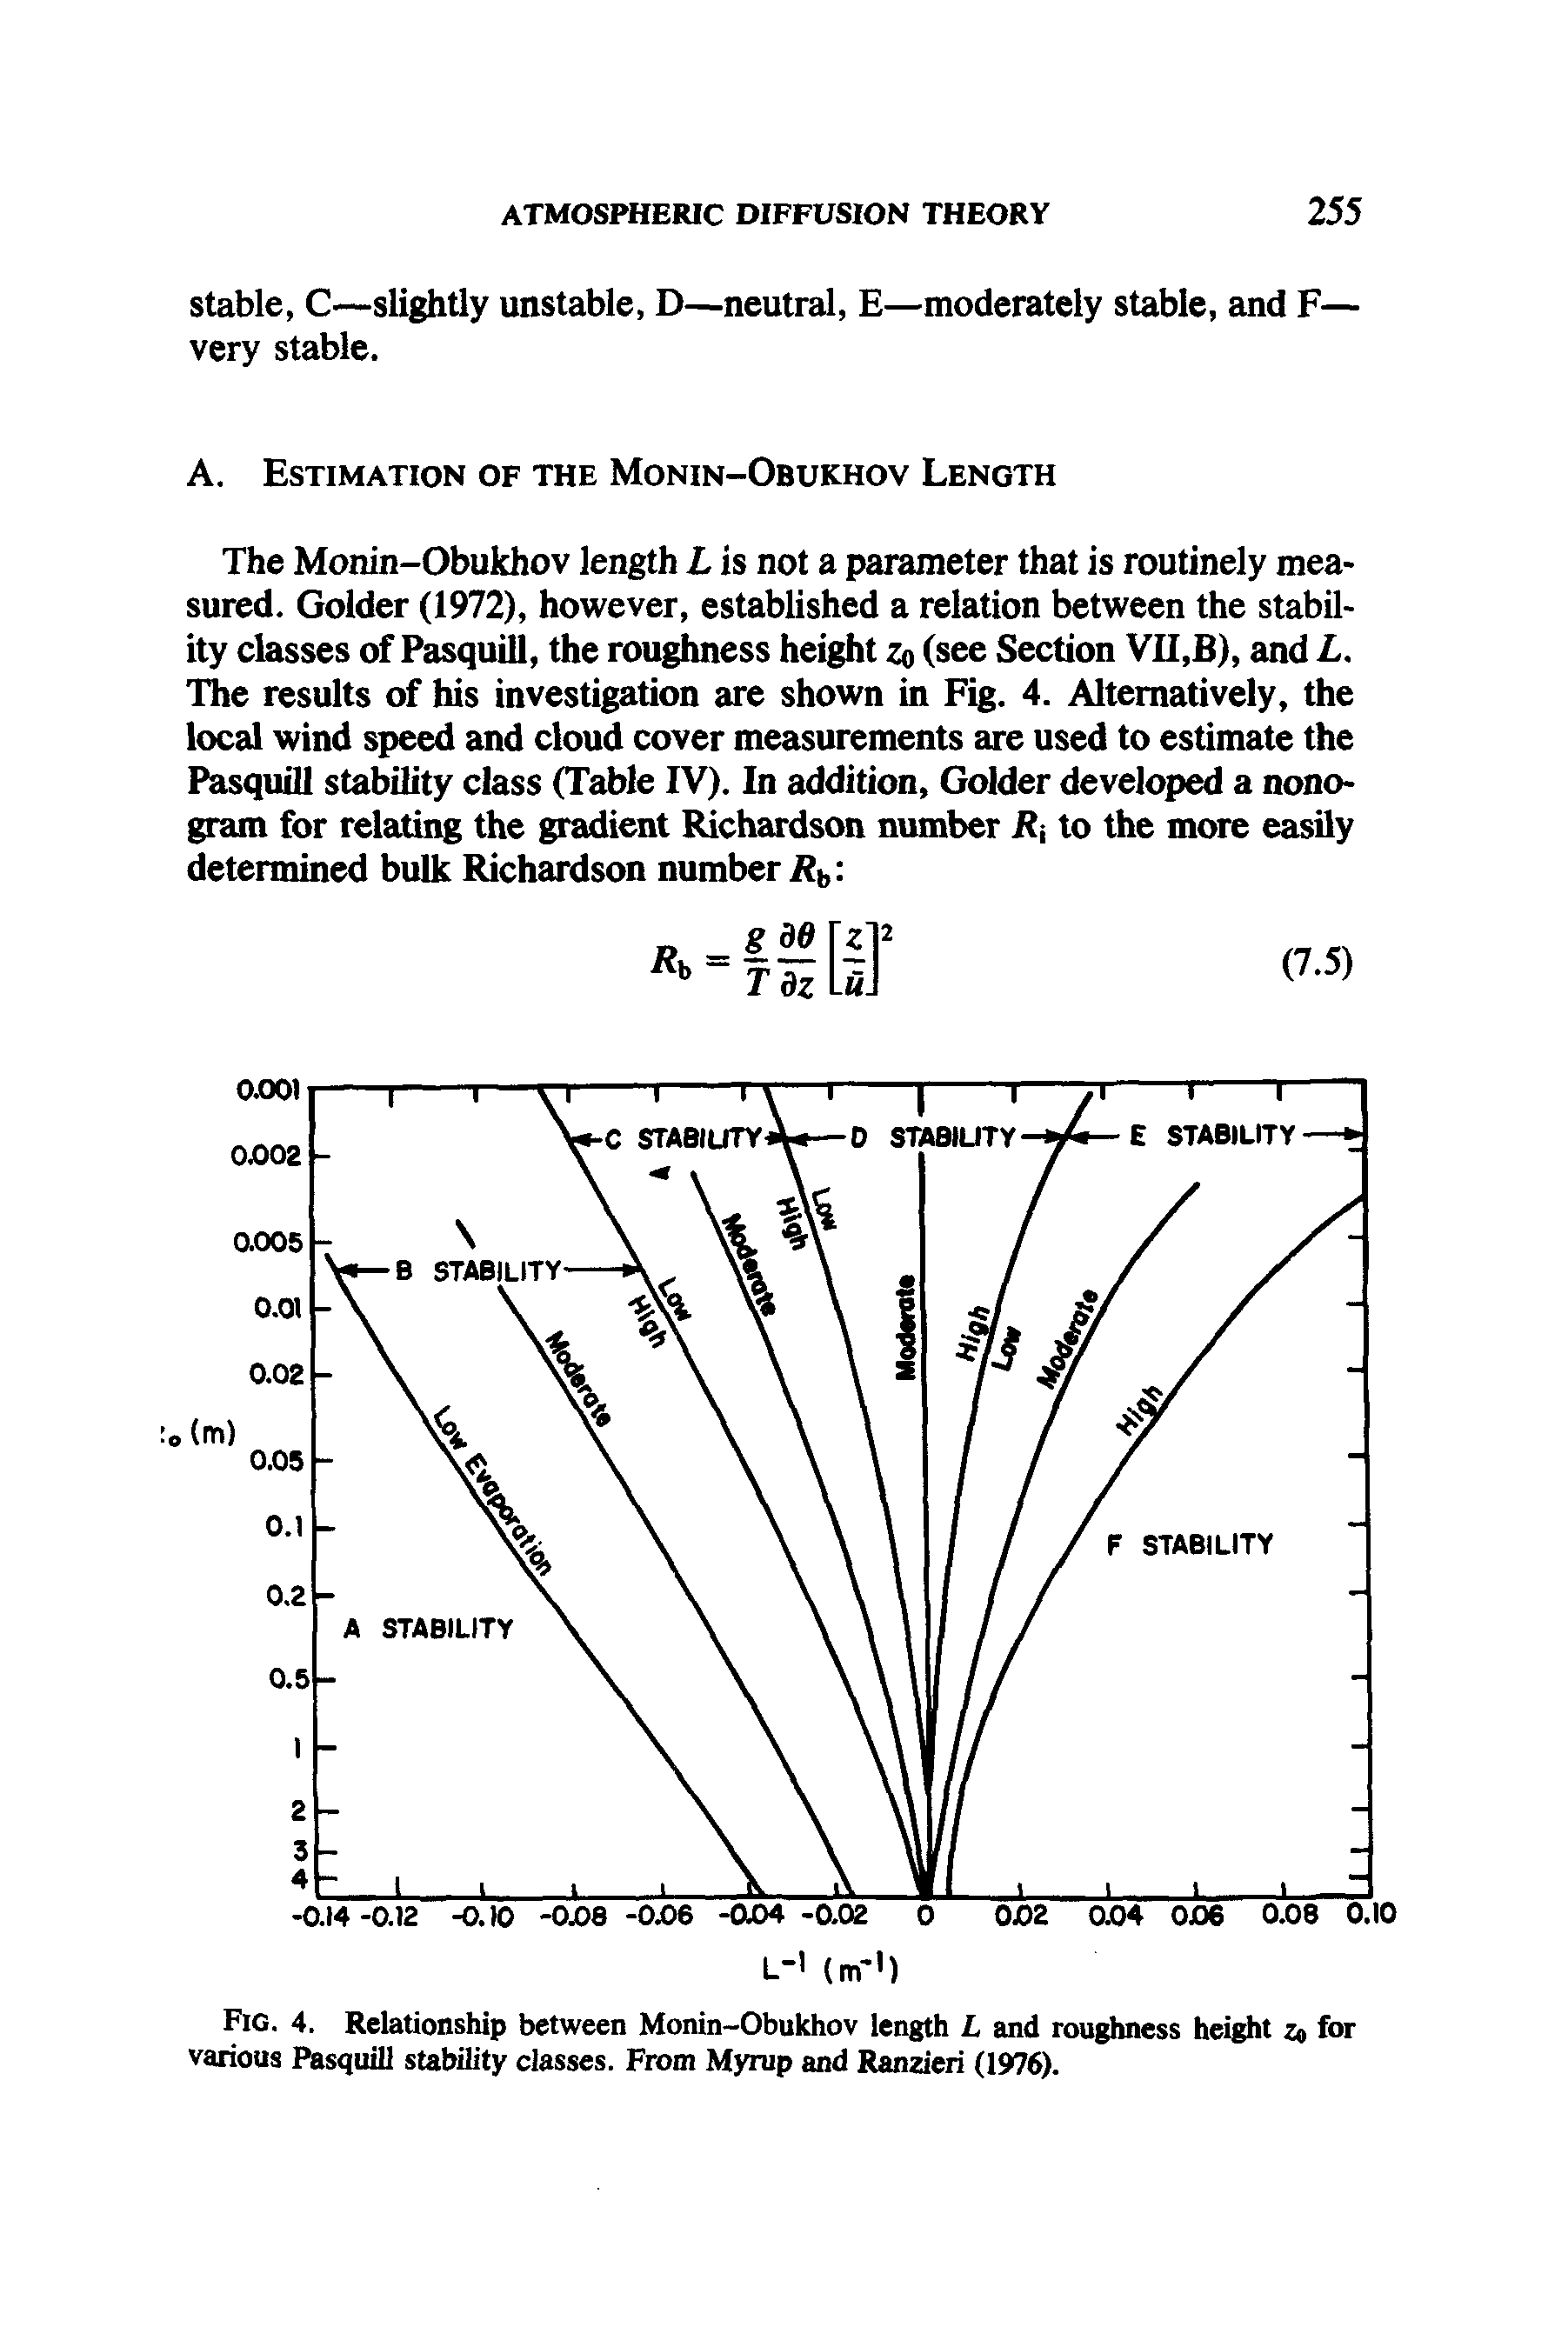 Fig. 4. Relationship between Monin-Obukhov length L and roughness height Zo for various Pasquill stability classes. From Myrup and Ranzieri (1976).